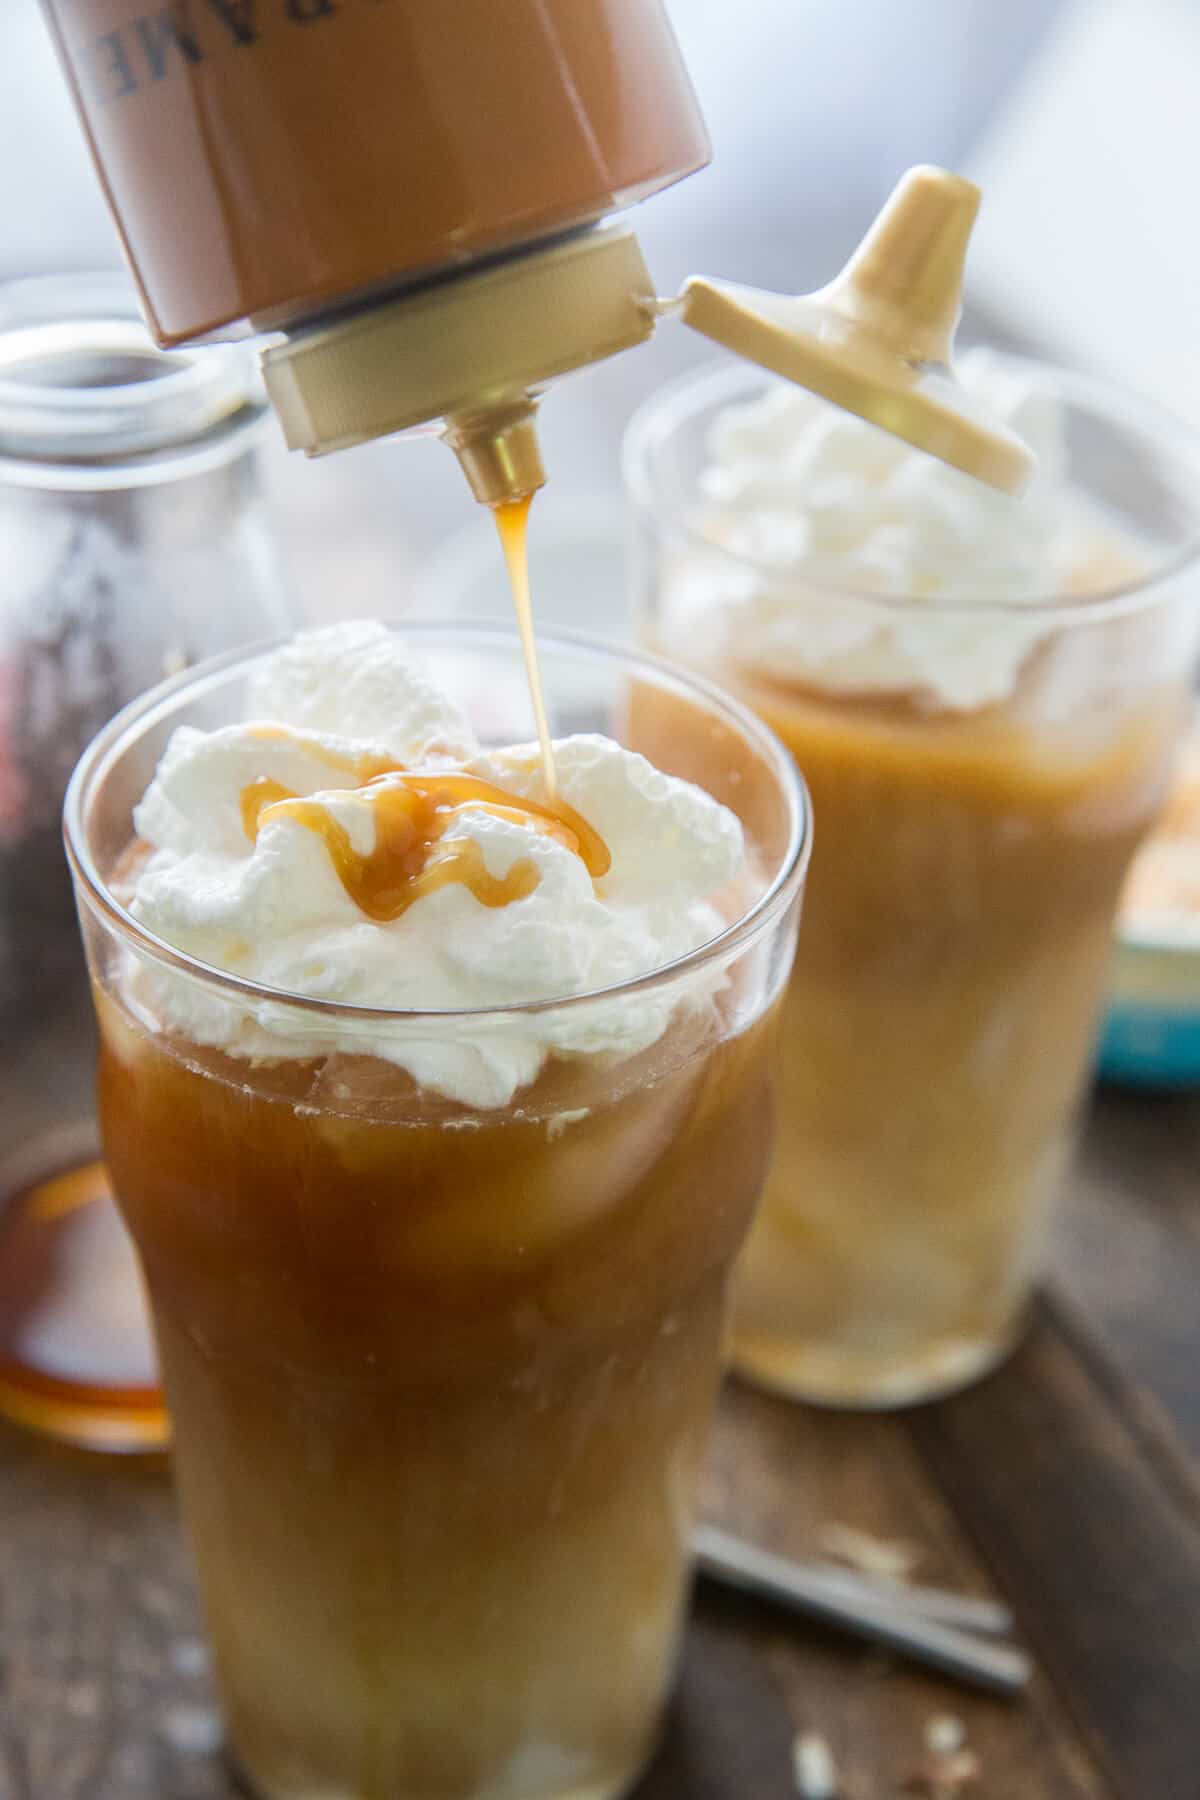 Grab and iced macchiato and relax! This coconut caramel favor is going to be your favorite!